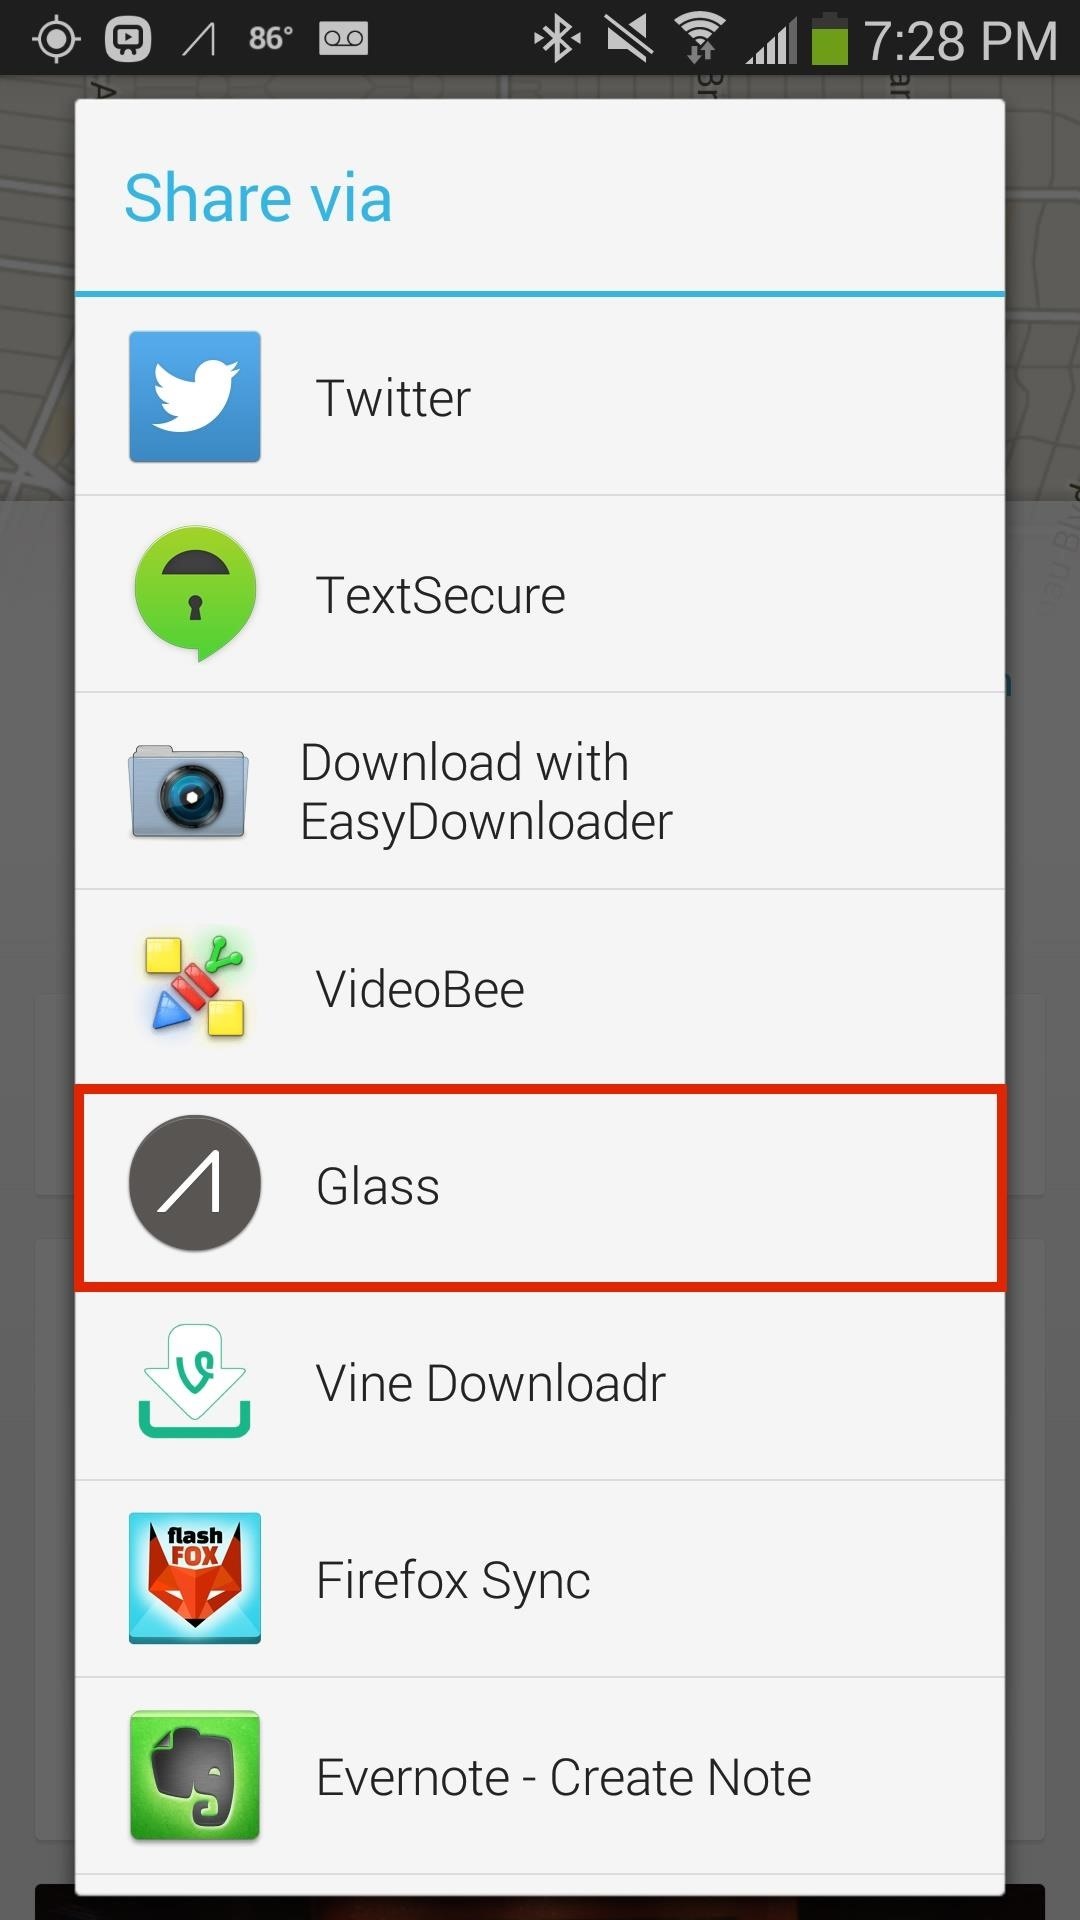 New Update Adds Big Changes to MyGlass App